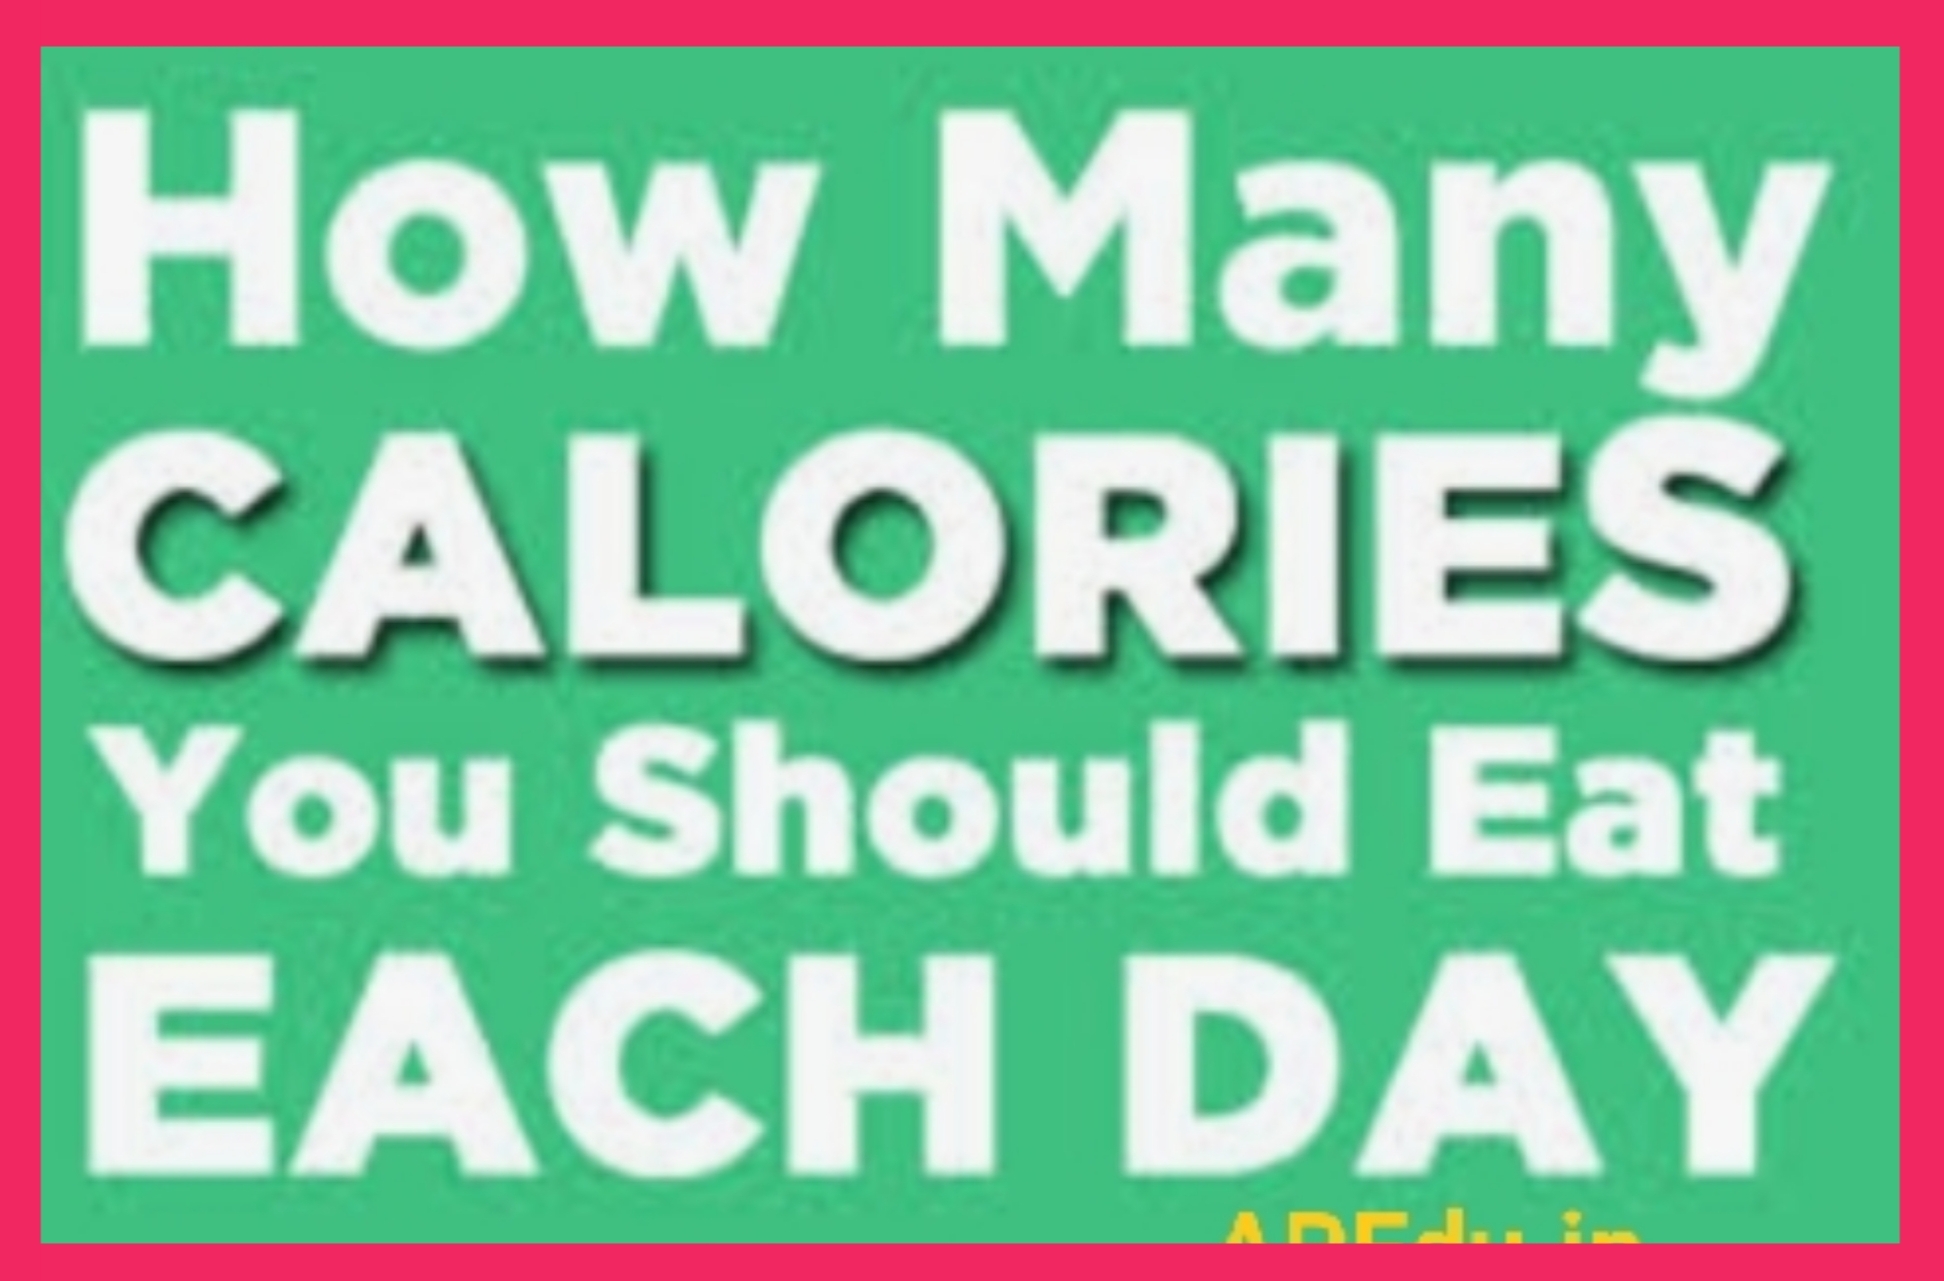 calories-how-many-calories-should-we-consume-daily-who-should-eat-how-much-let-s-find-out